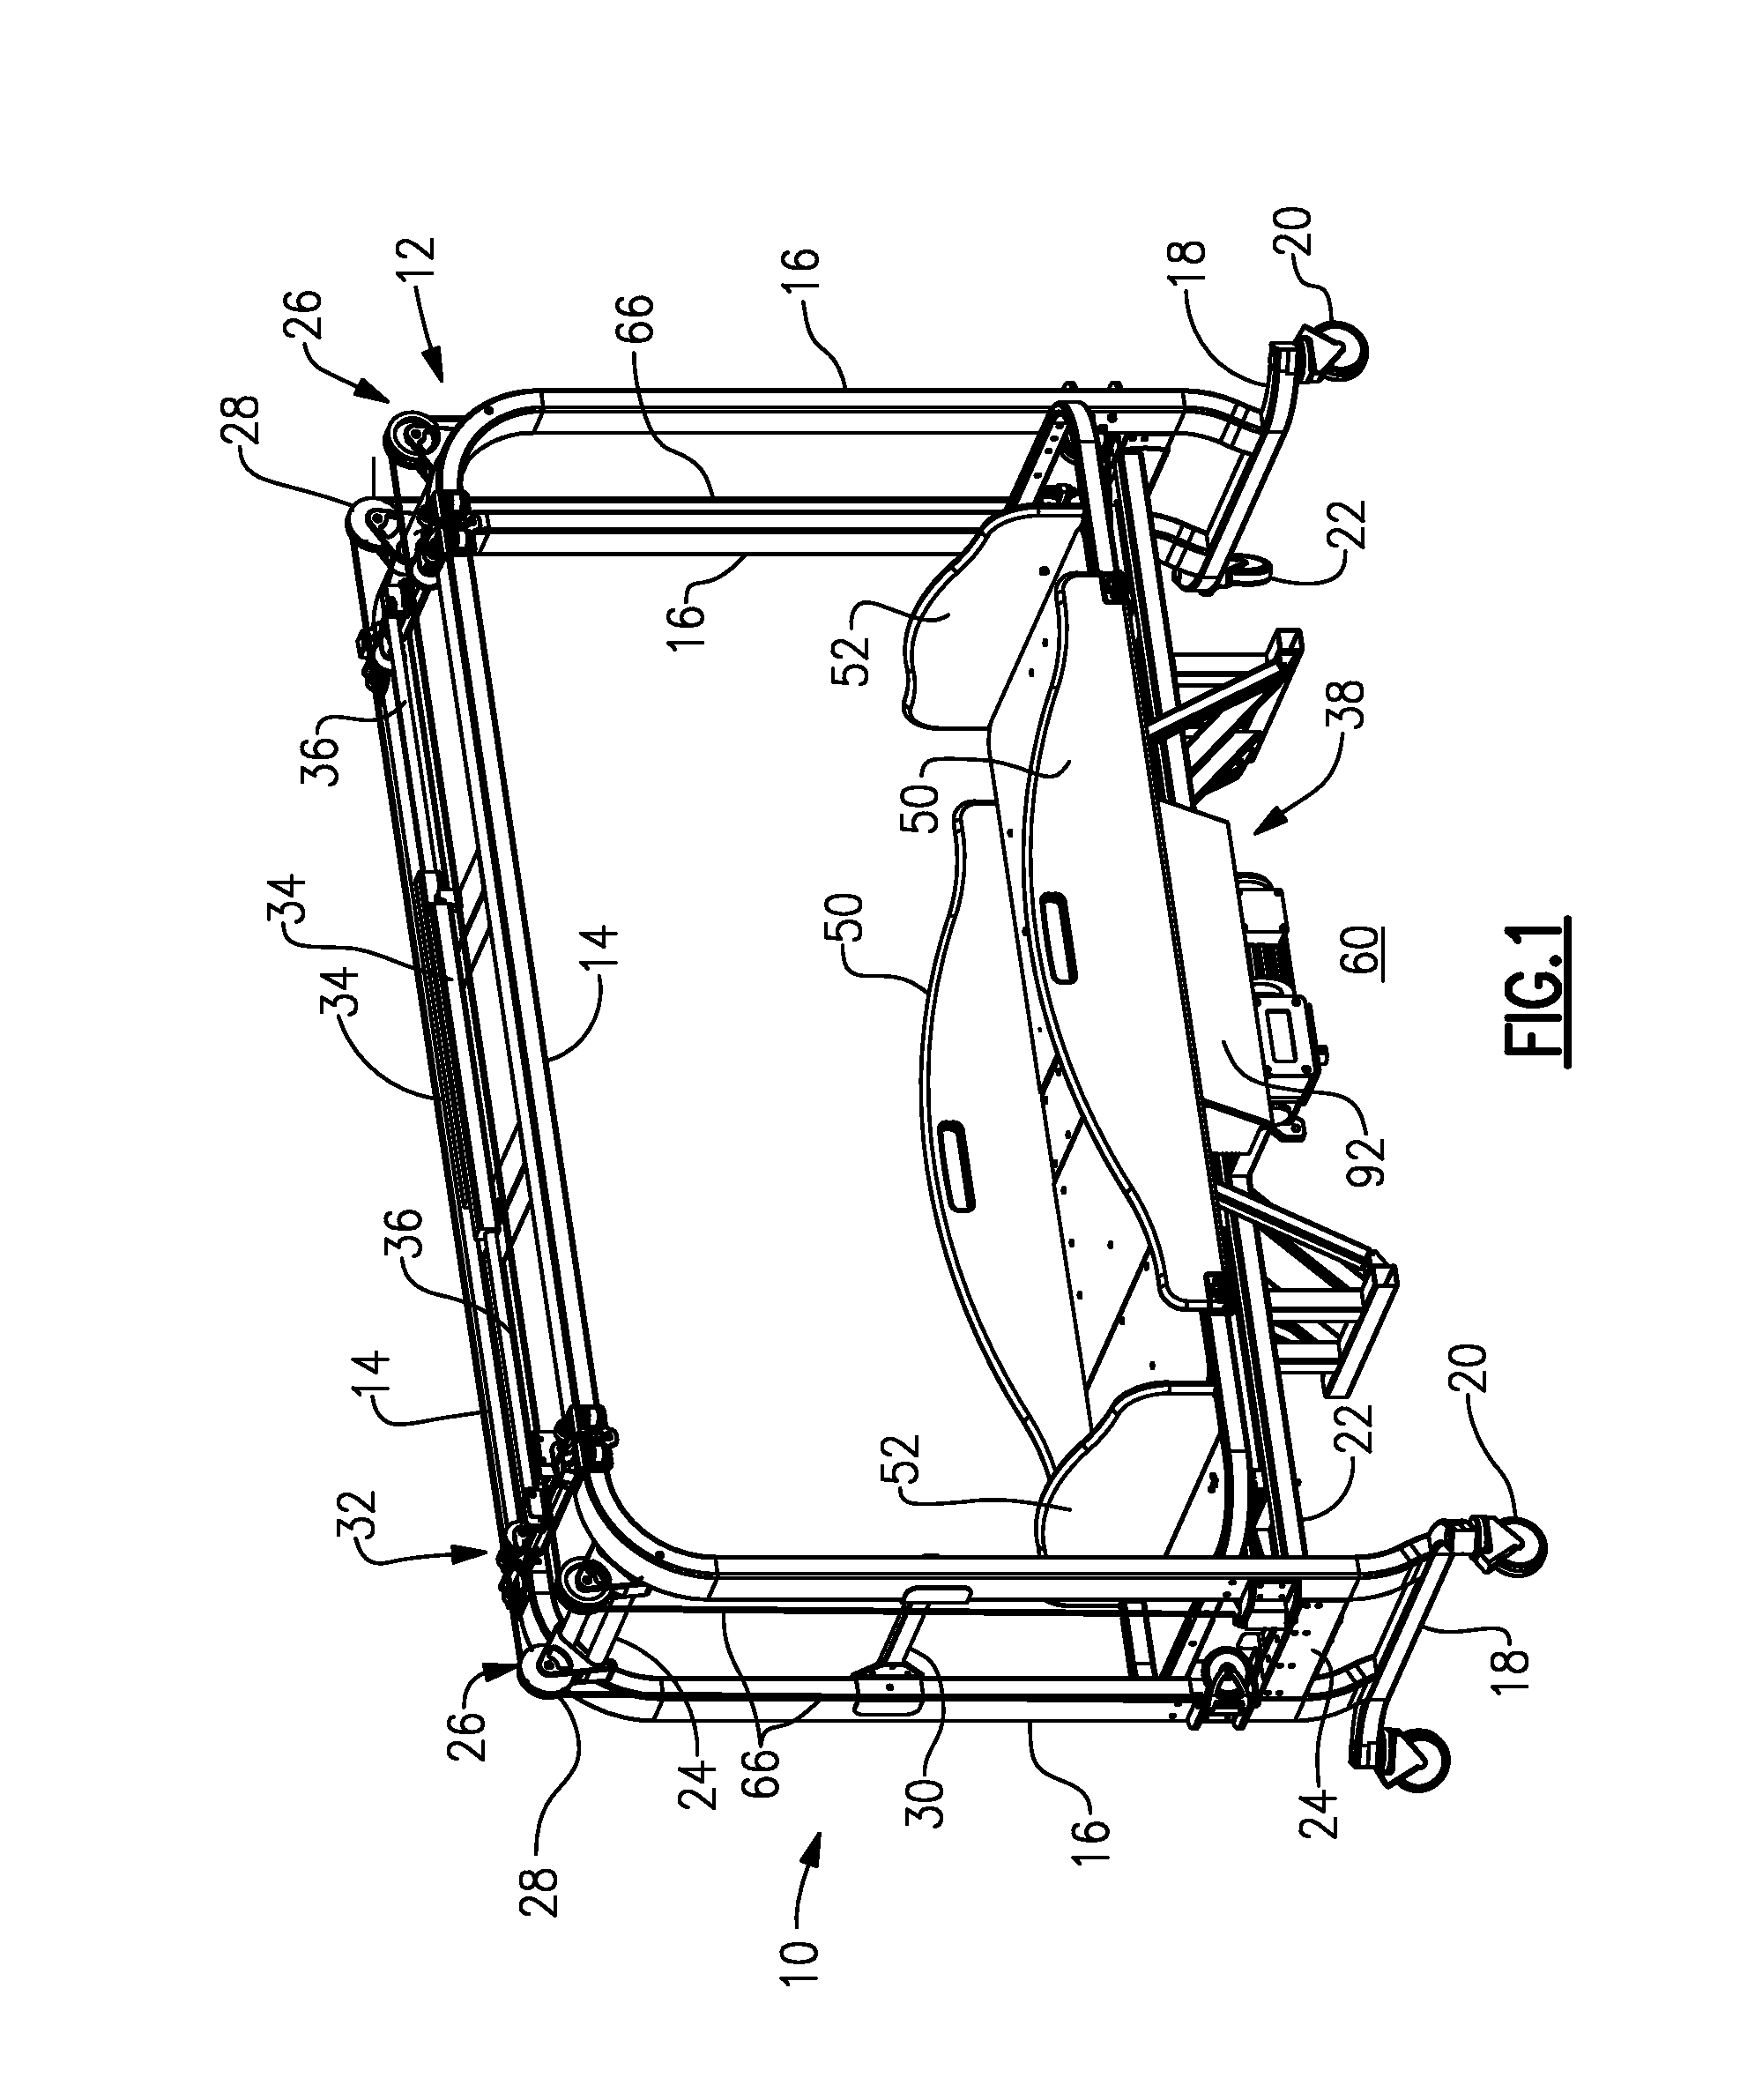 Passive mobility exercise and range-of-motion bed apparatus